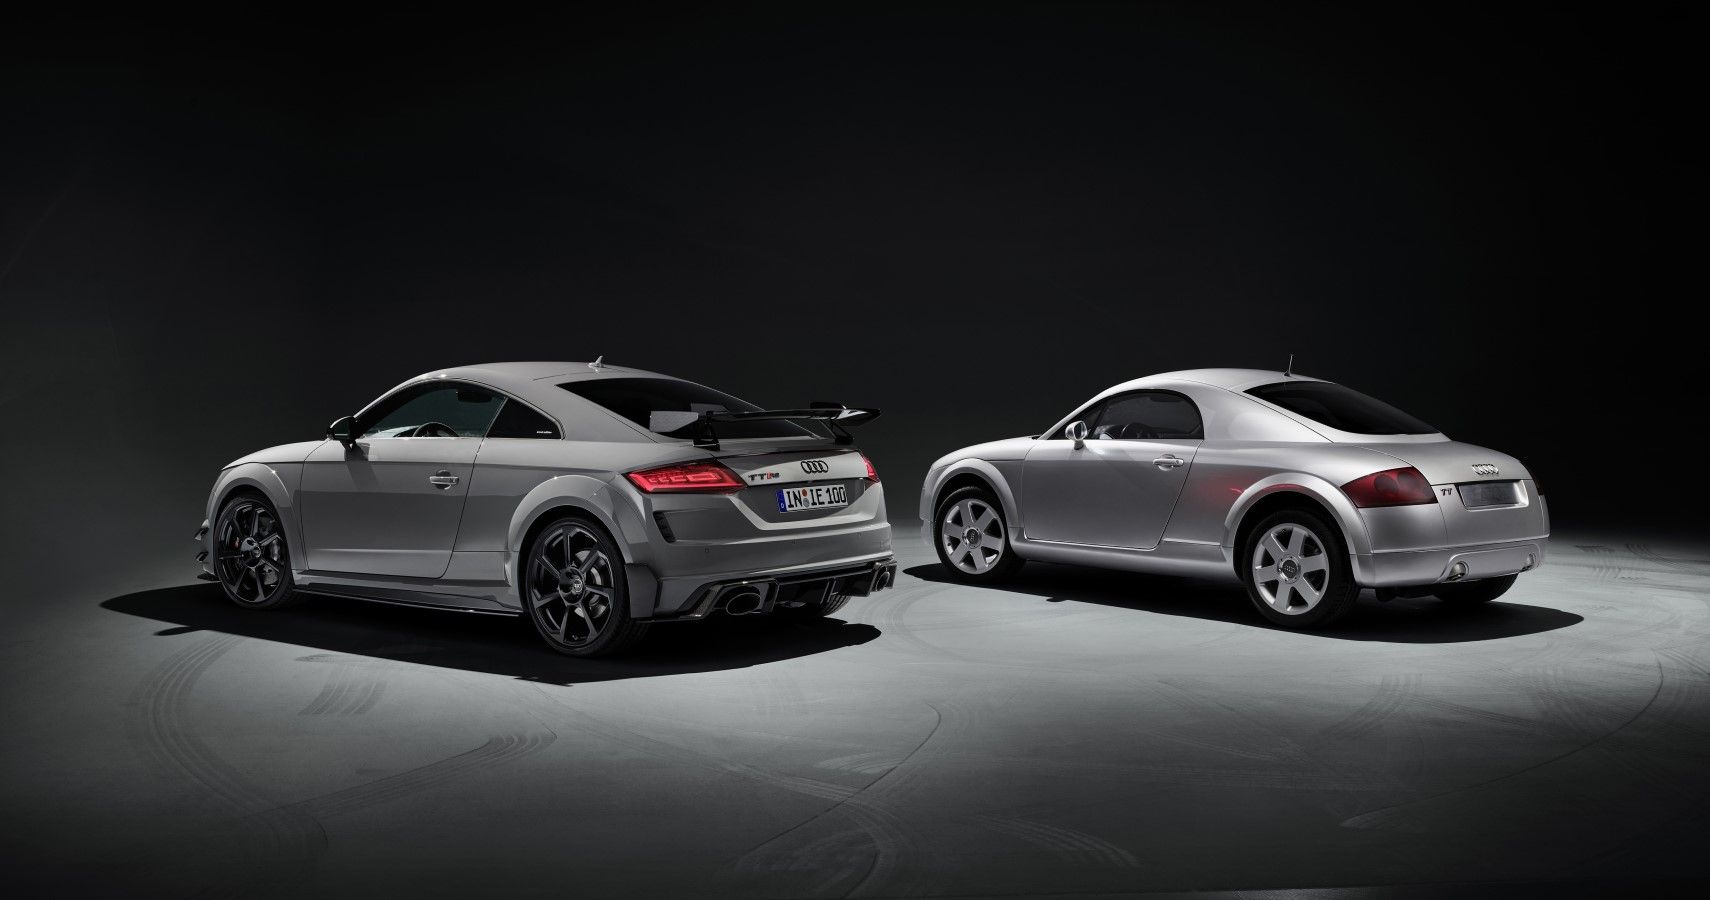 Audi TT RS Coupe Iconic Edition with the first-gen Audi TT rear third quarter view comparison